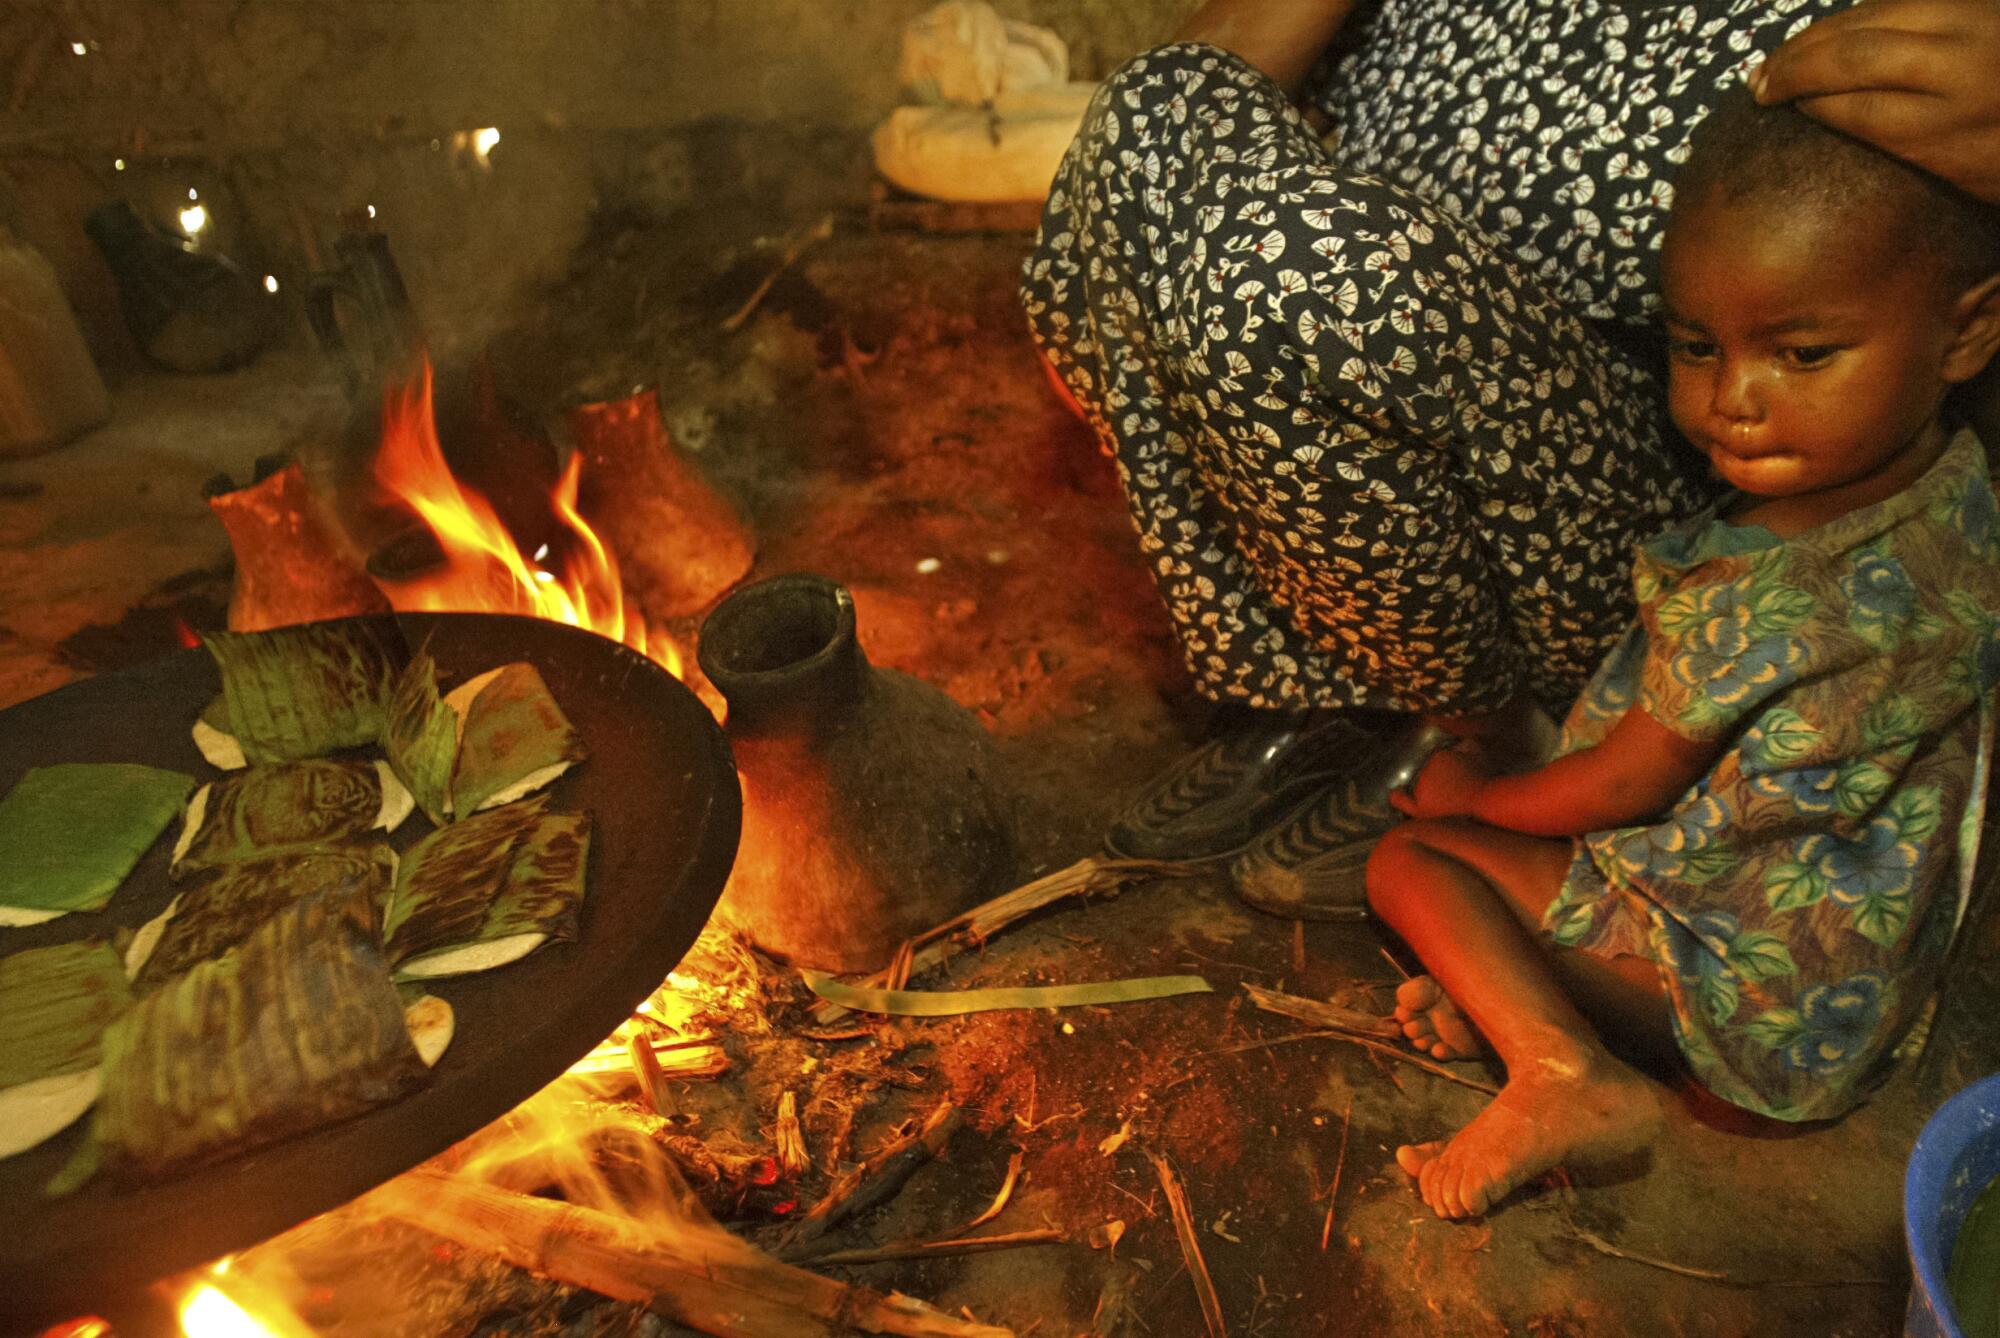 An infant sits with an adult near a cooking fire